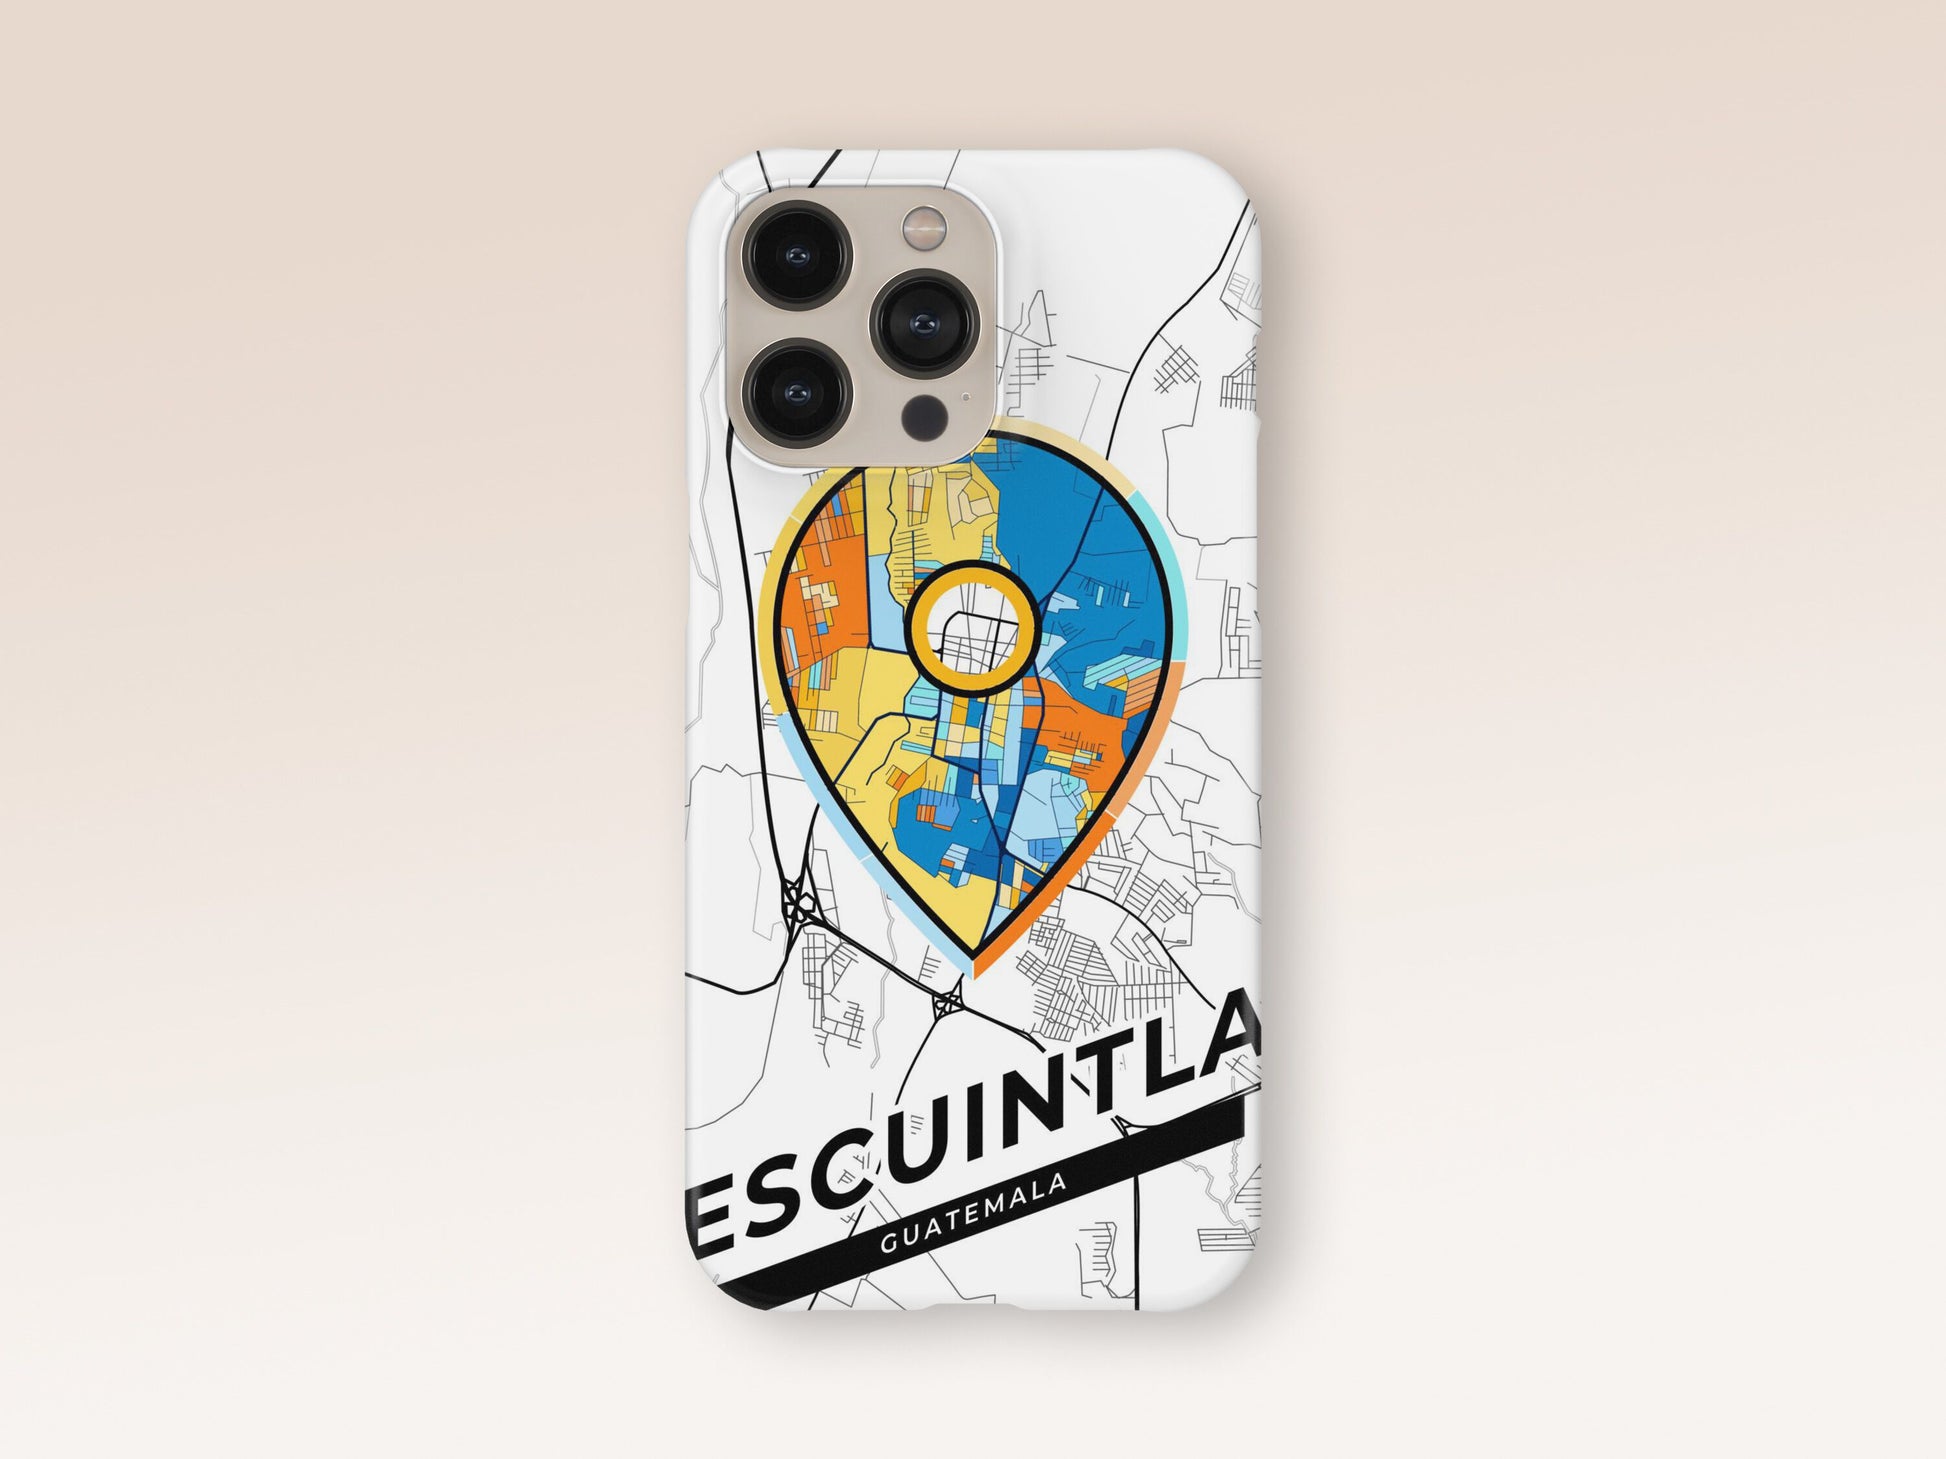 Escuintla Guatemala slim phone case with colorful icon. Birthday, wedding or housewarming gift. Couple match cases. 1